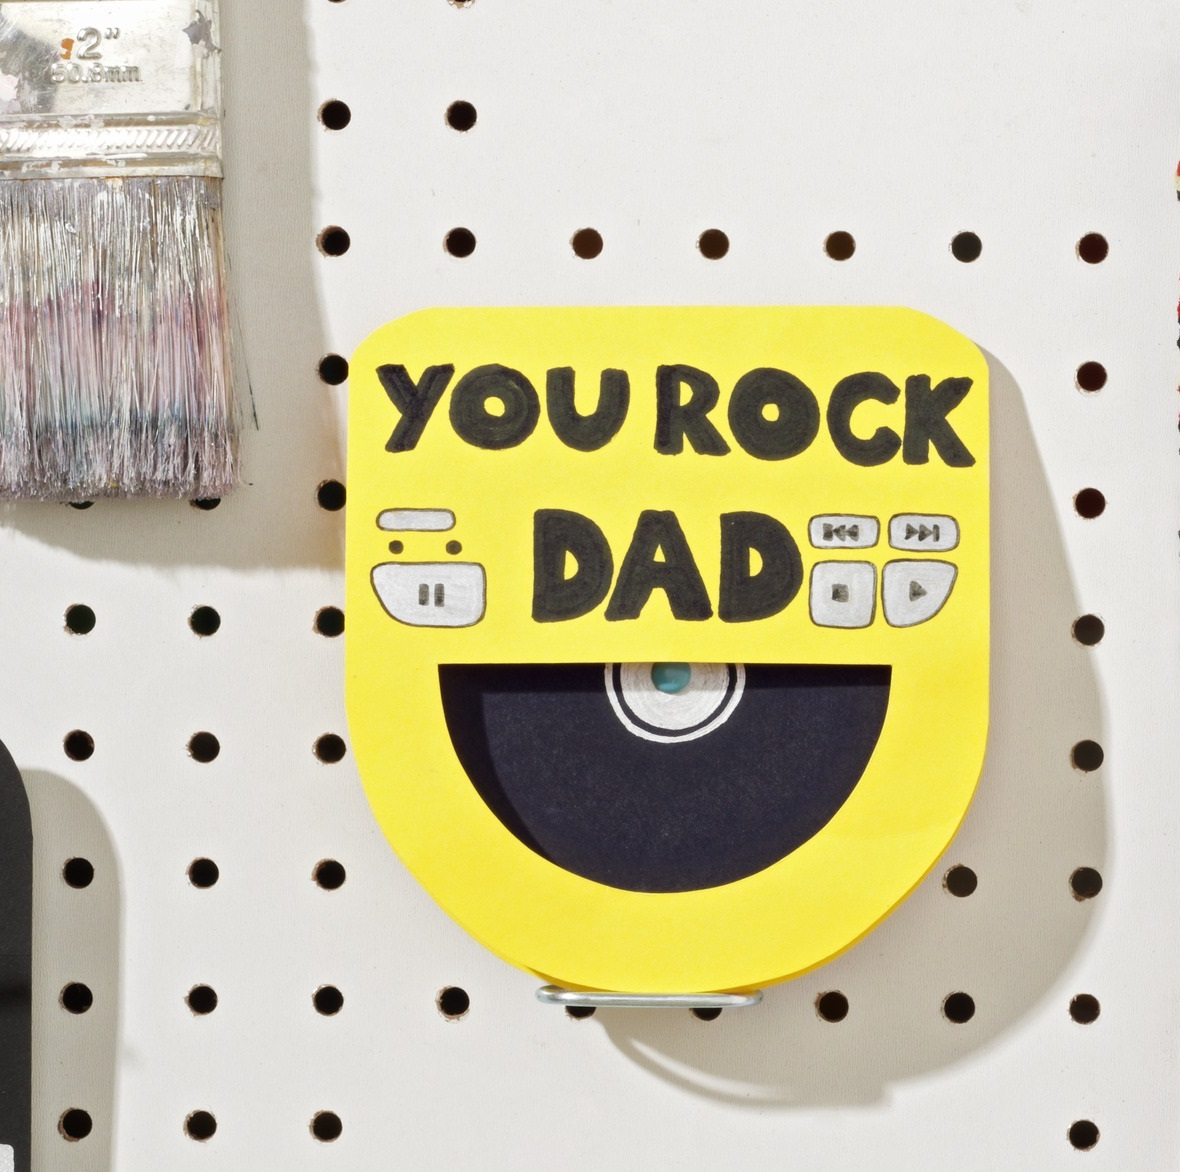 Birthday Card For Dad Ideas Fathers Day Crafts For Kids 21 Too Cute Gift Ideas For Dad Parents